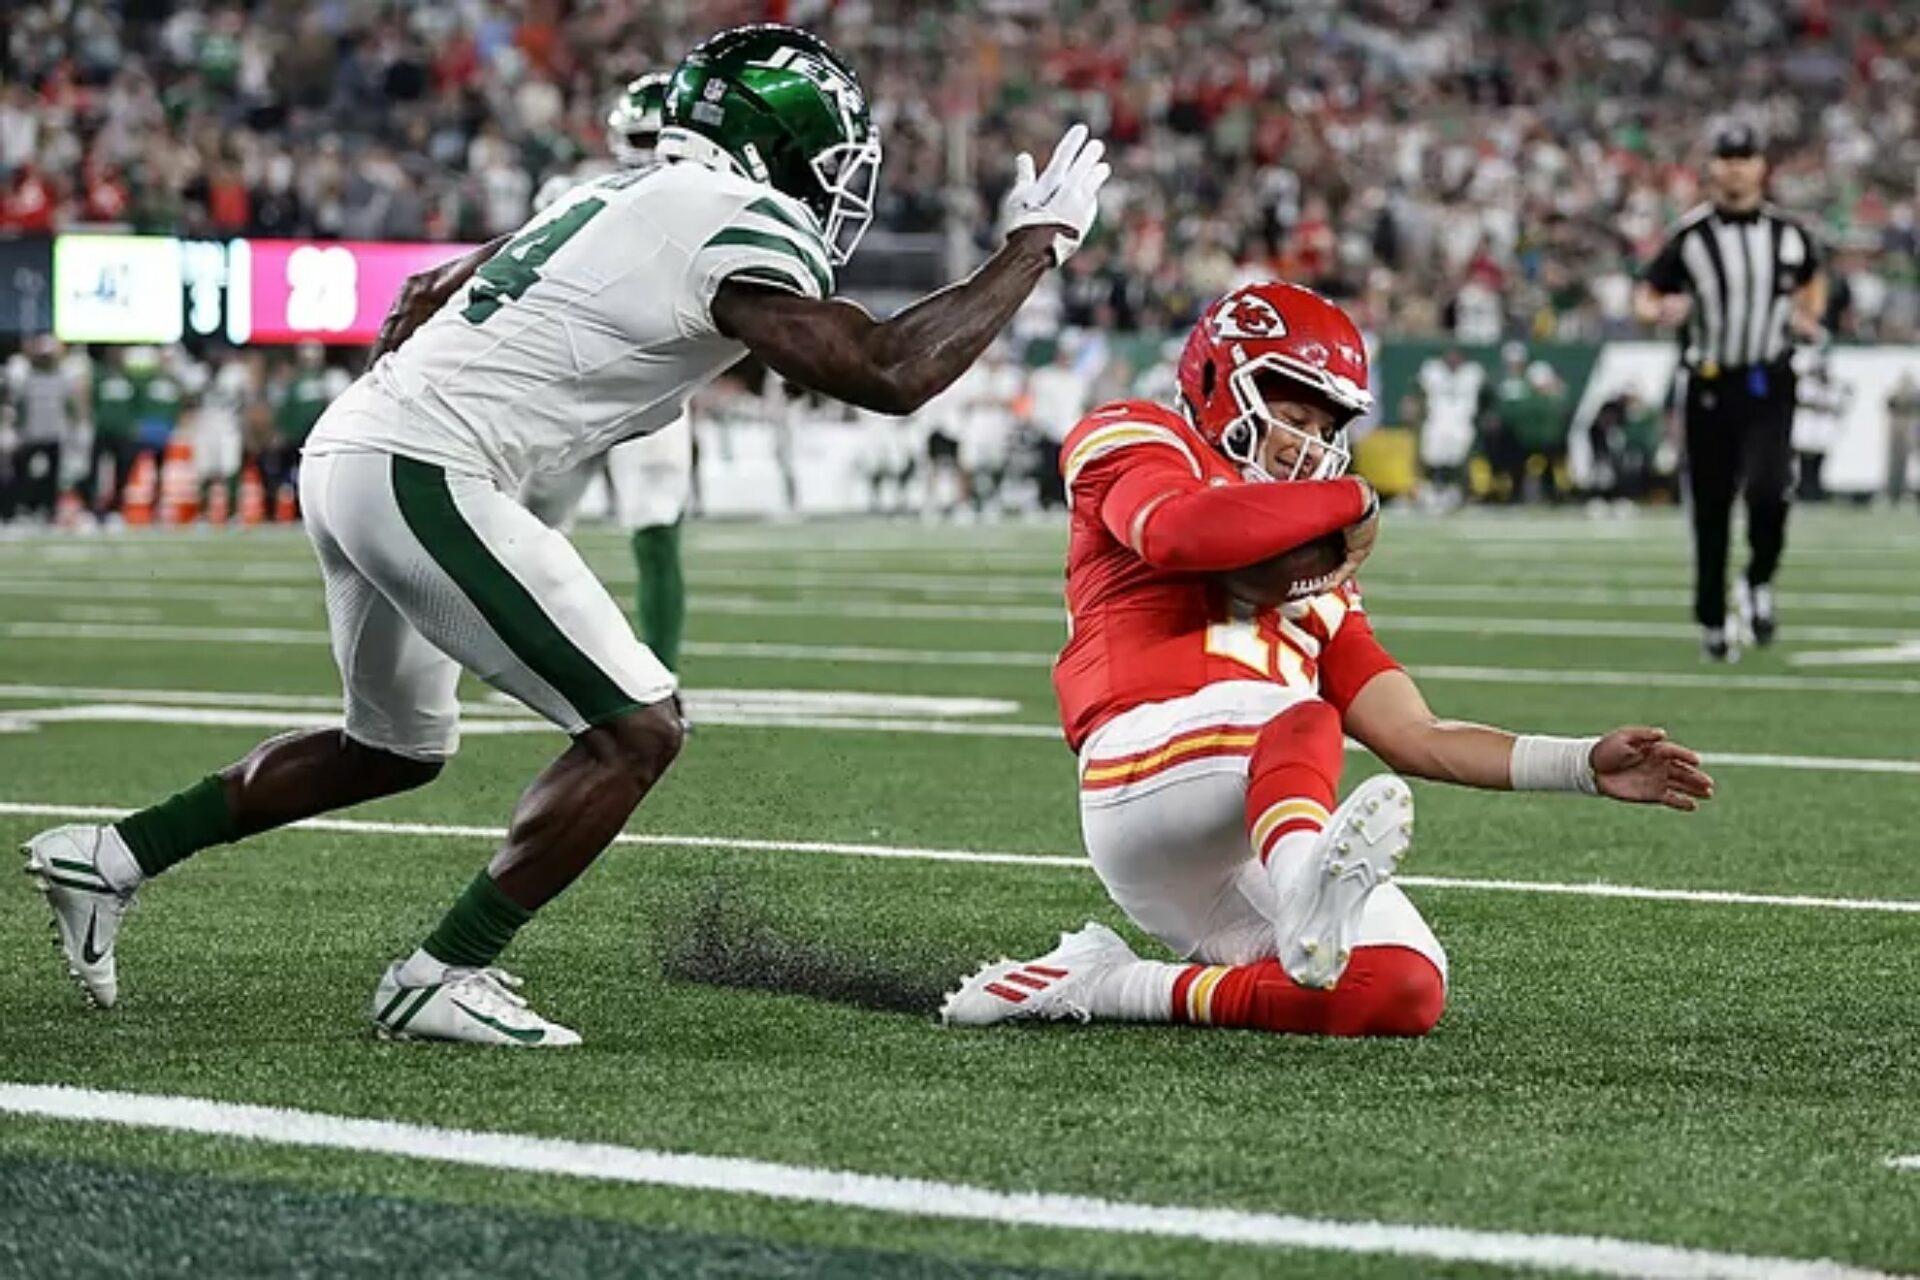 Patrick Mahomes’ Slide Cost Me Money, but Sports Aren’t Rigged: A Short Story